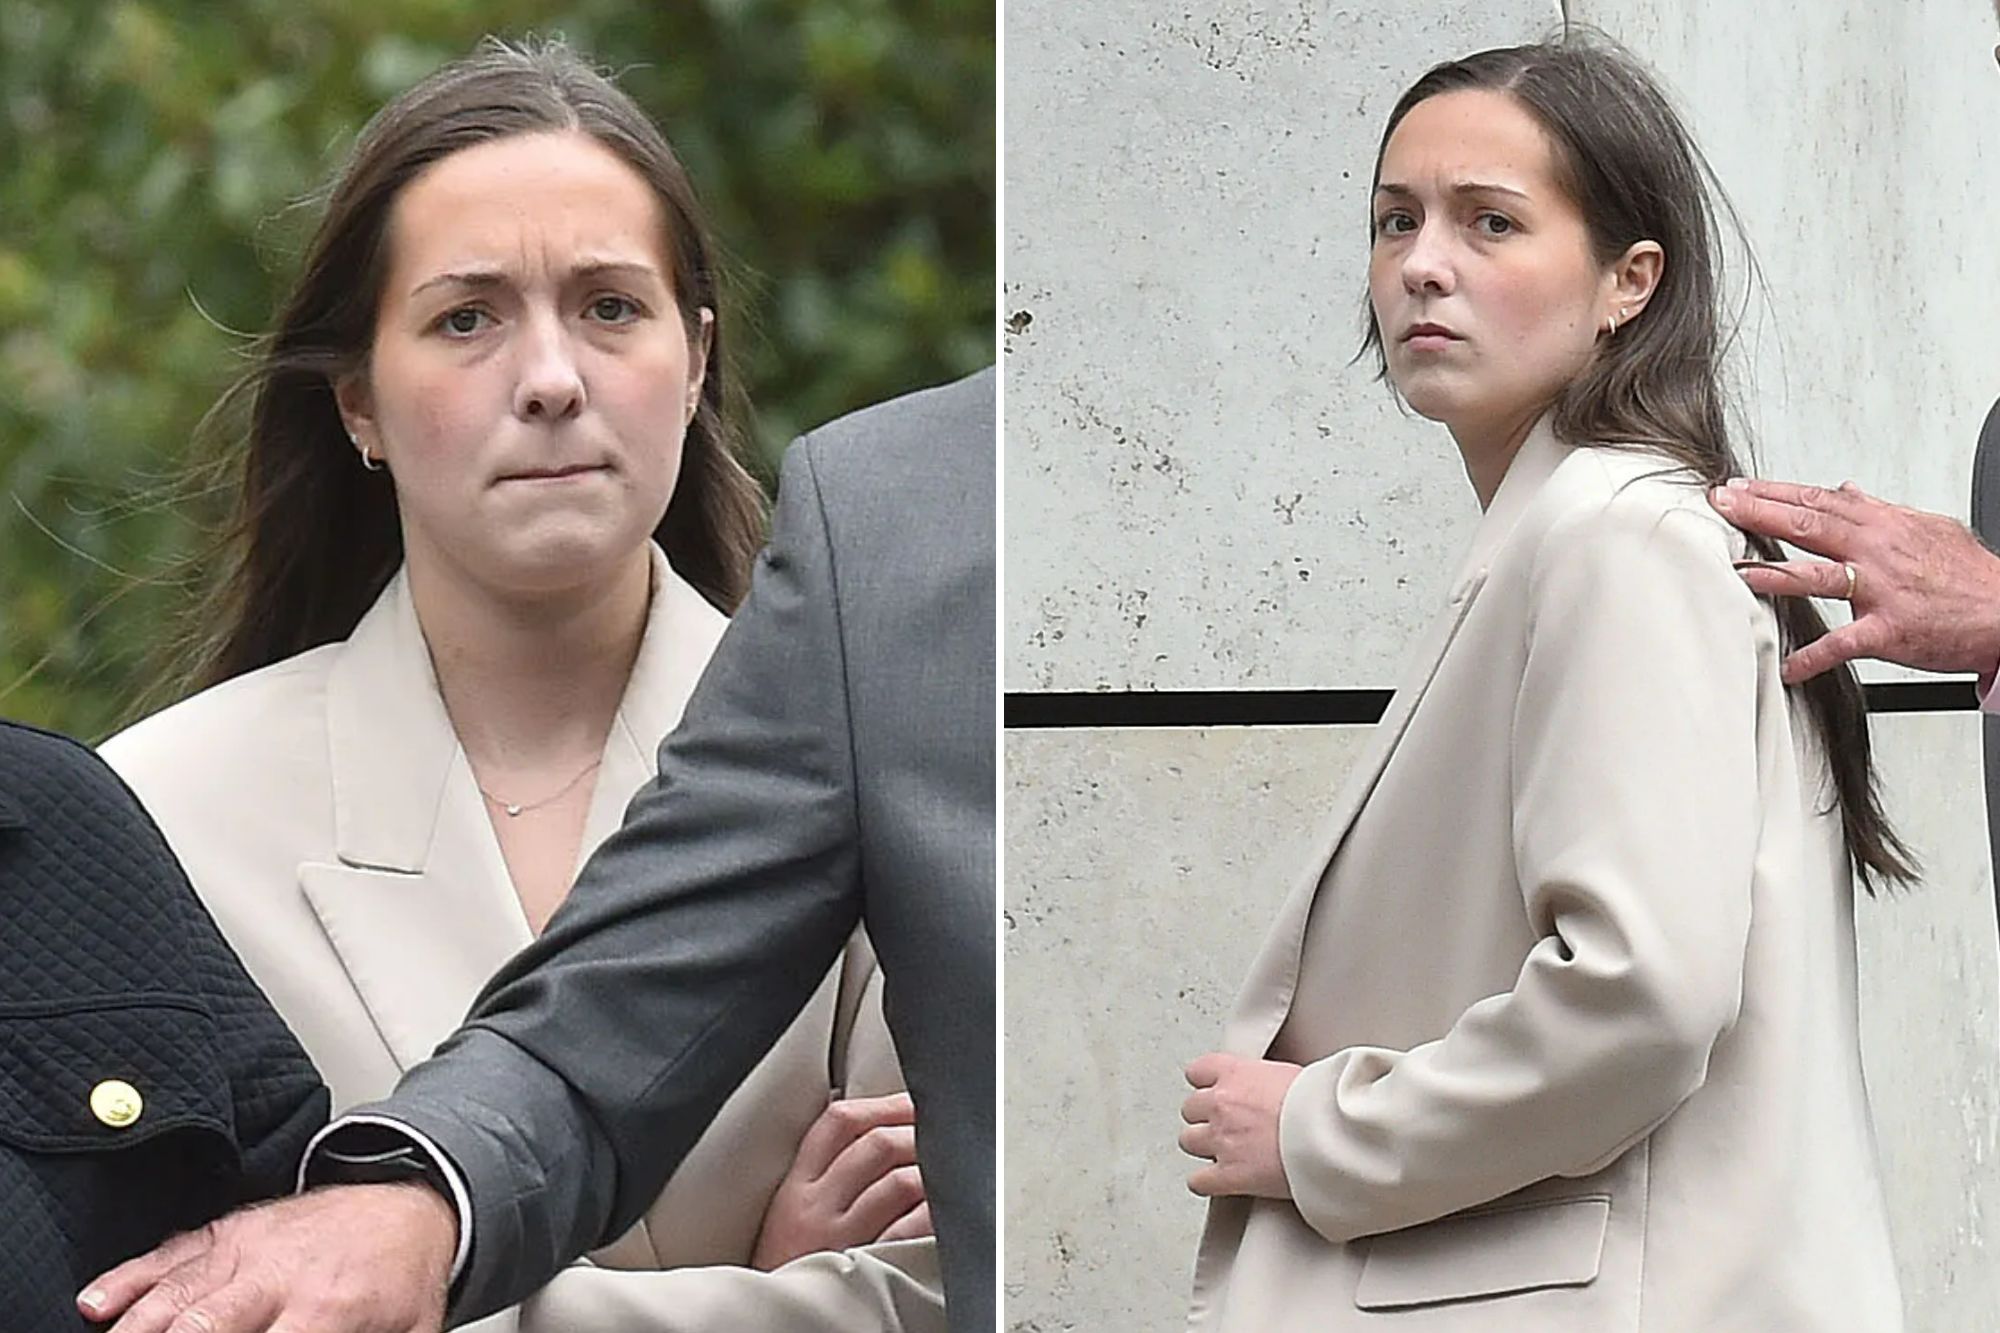 Teacher, 30, 'had sex with two schoolboys including one who got her pregnant'